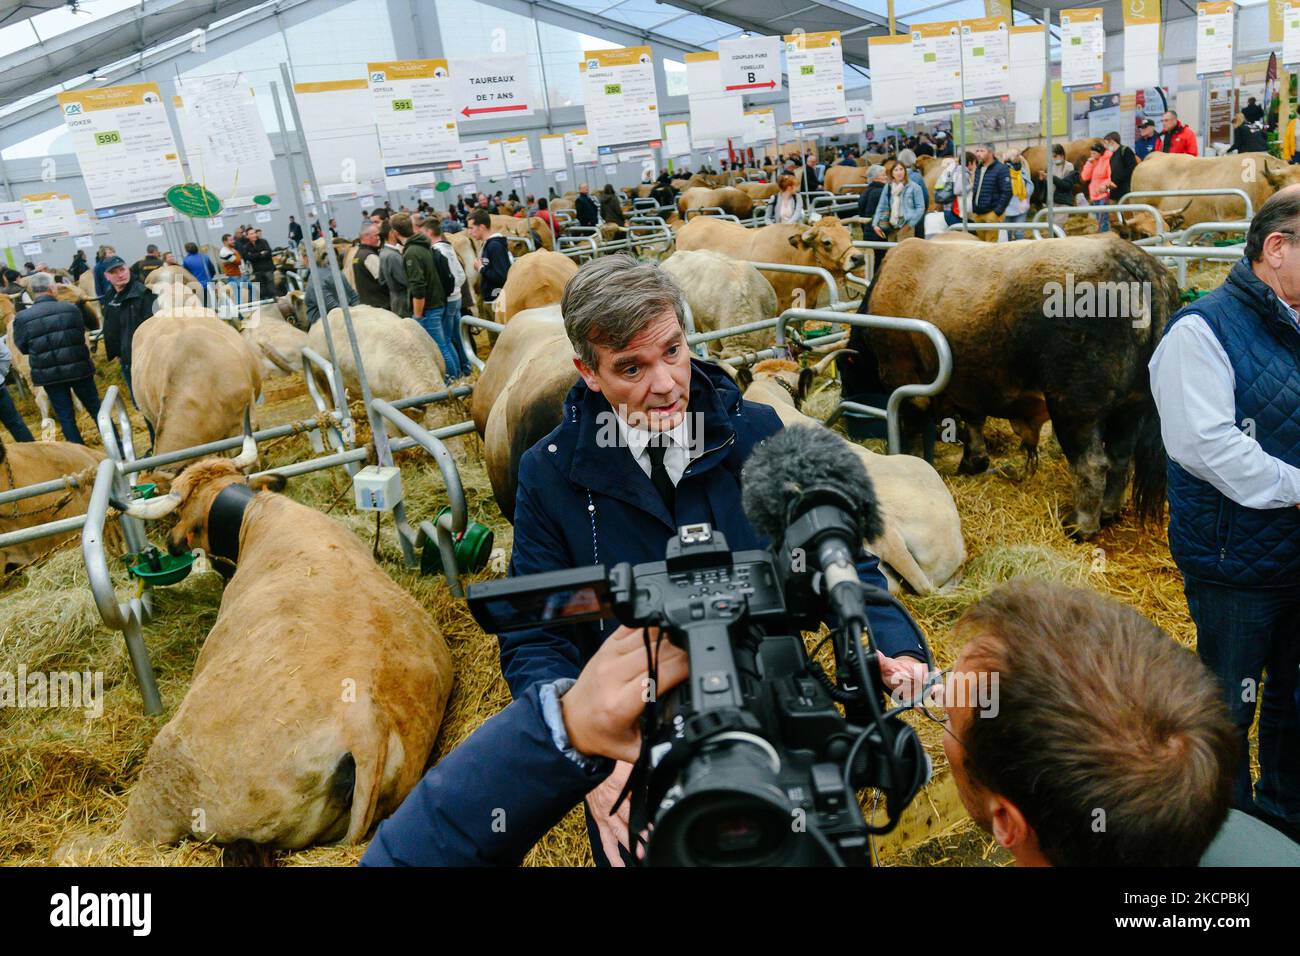 2021-10-06, France. Arnaud Montebourg, former Minister of Economy and candidate for the 2022 presidential election being interviewed, at the 30th Sommet de l Elevage (livestock summit) in Cournon d Auvergne, near Clermont Ferrand. (Photo by Adrien Fillon/NurPhoto) Stock Photo